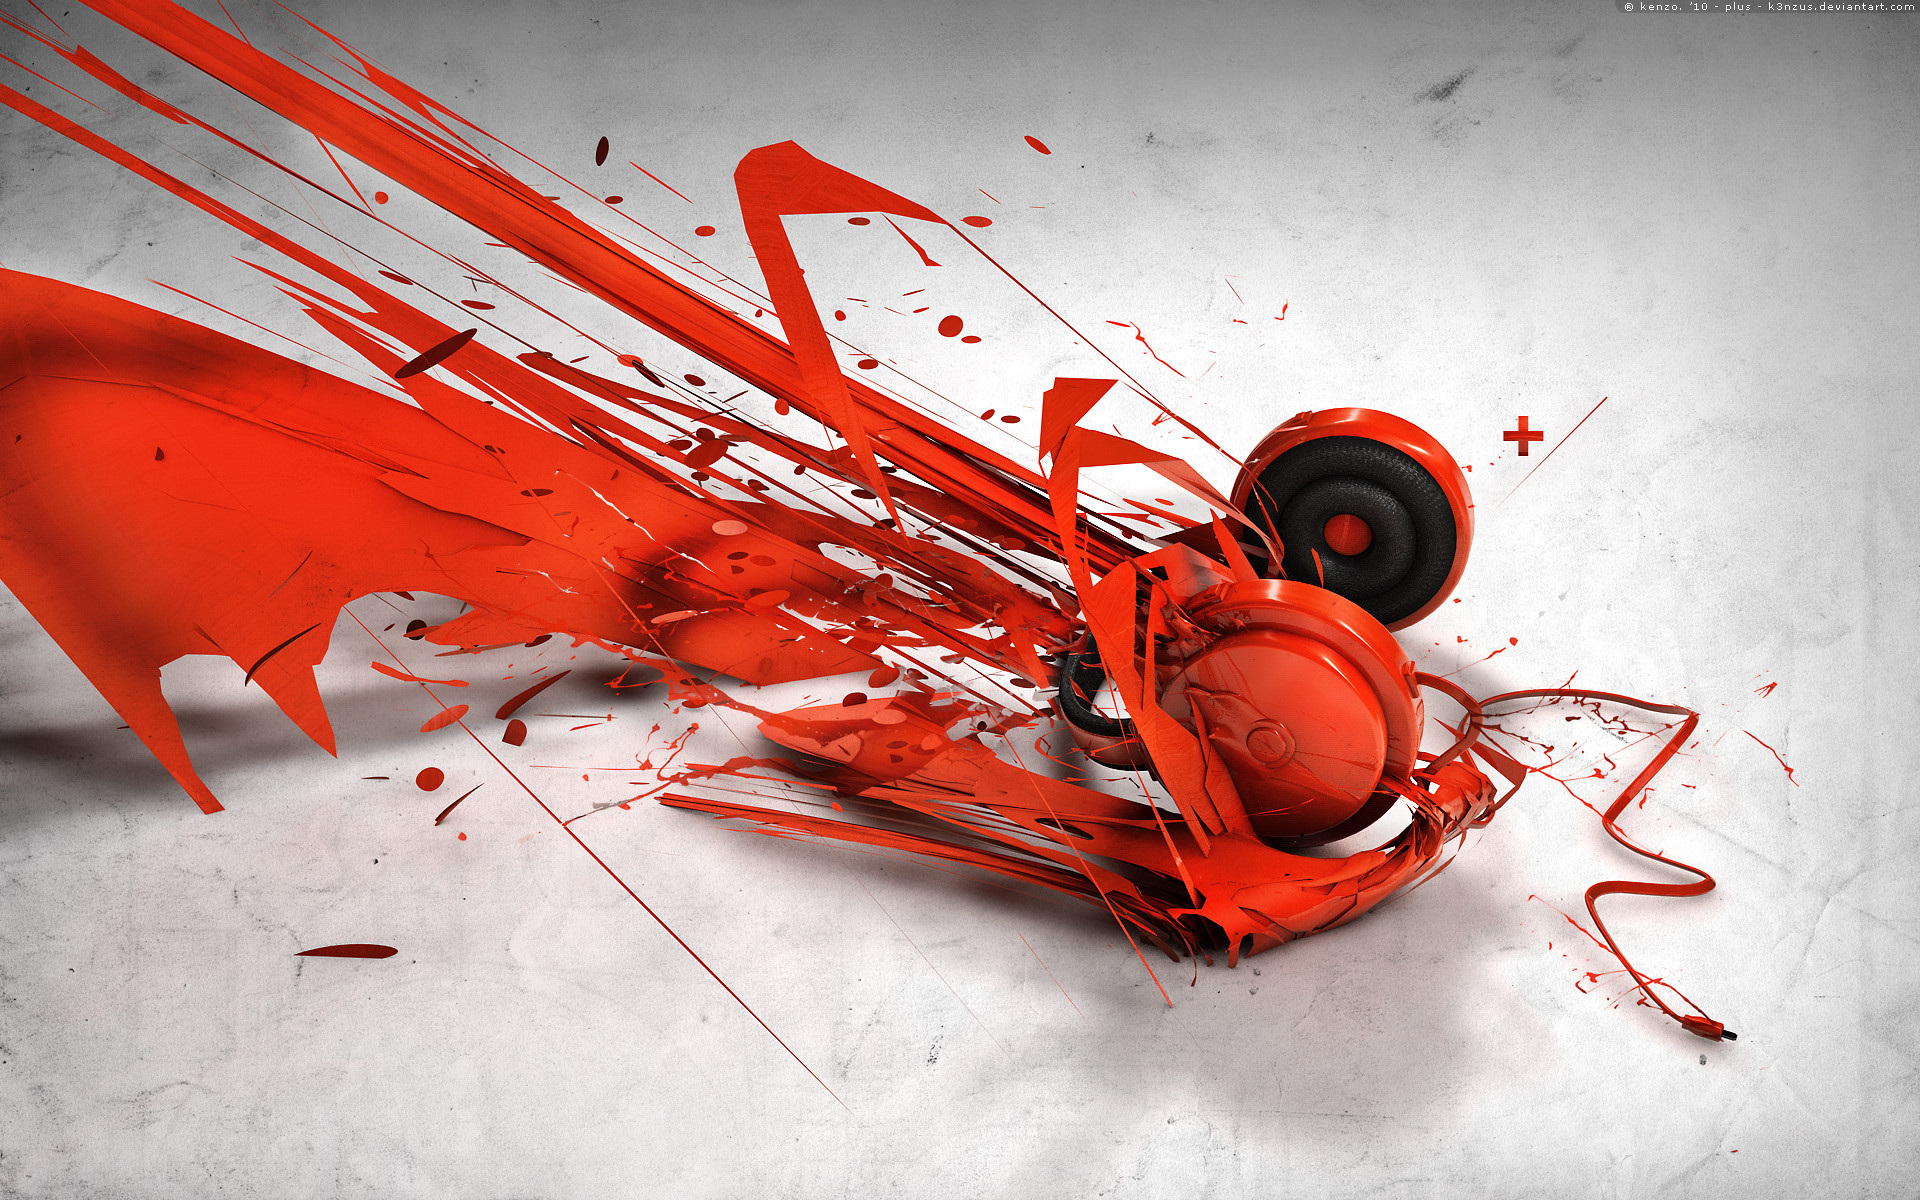 1920x1200 Author: Bruno Kenzo. Tags: Music abstract Headphones